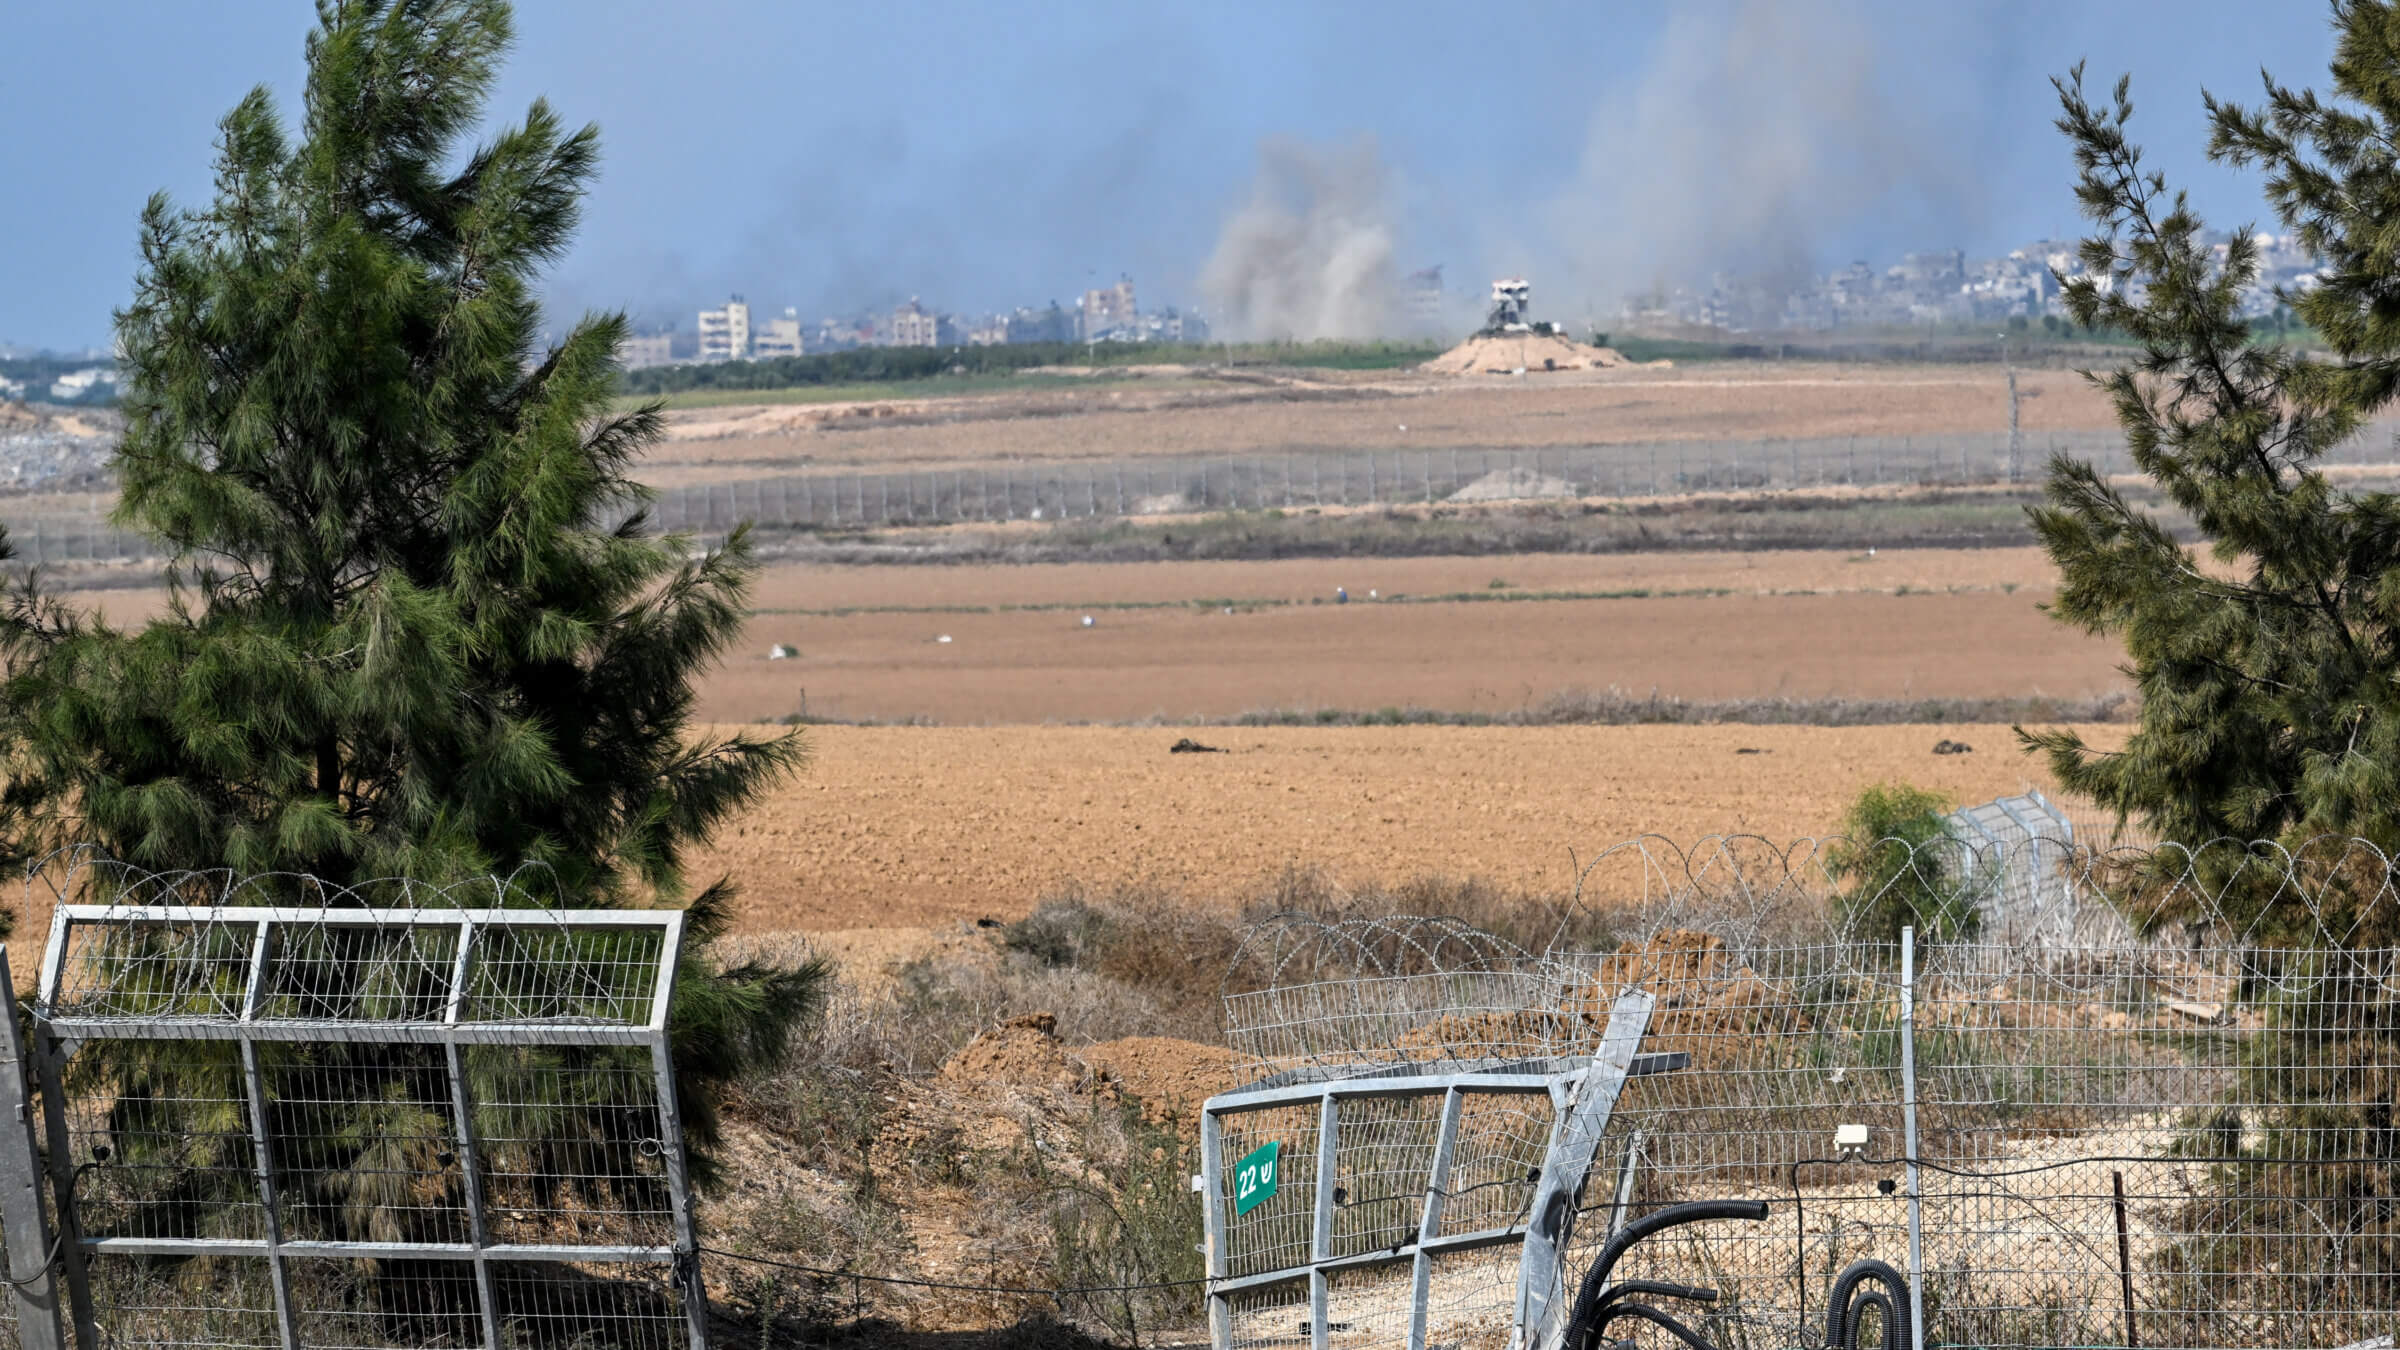 Smoke rises in the distance from Gaza near the spot where Hamas militants broke through the fence near the Gaza border.